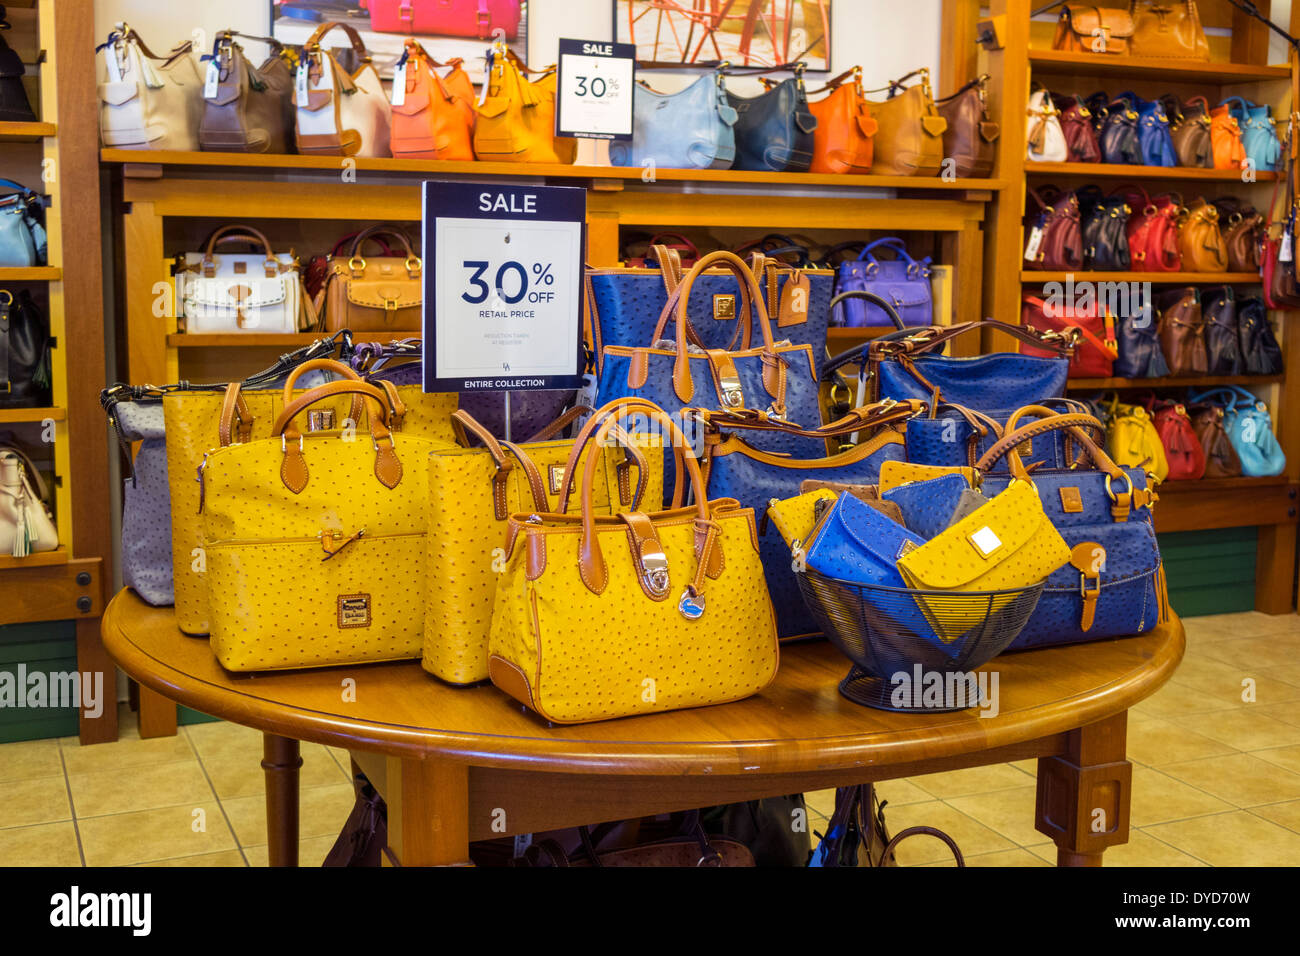 dooney and bourke handbags outlet